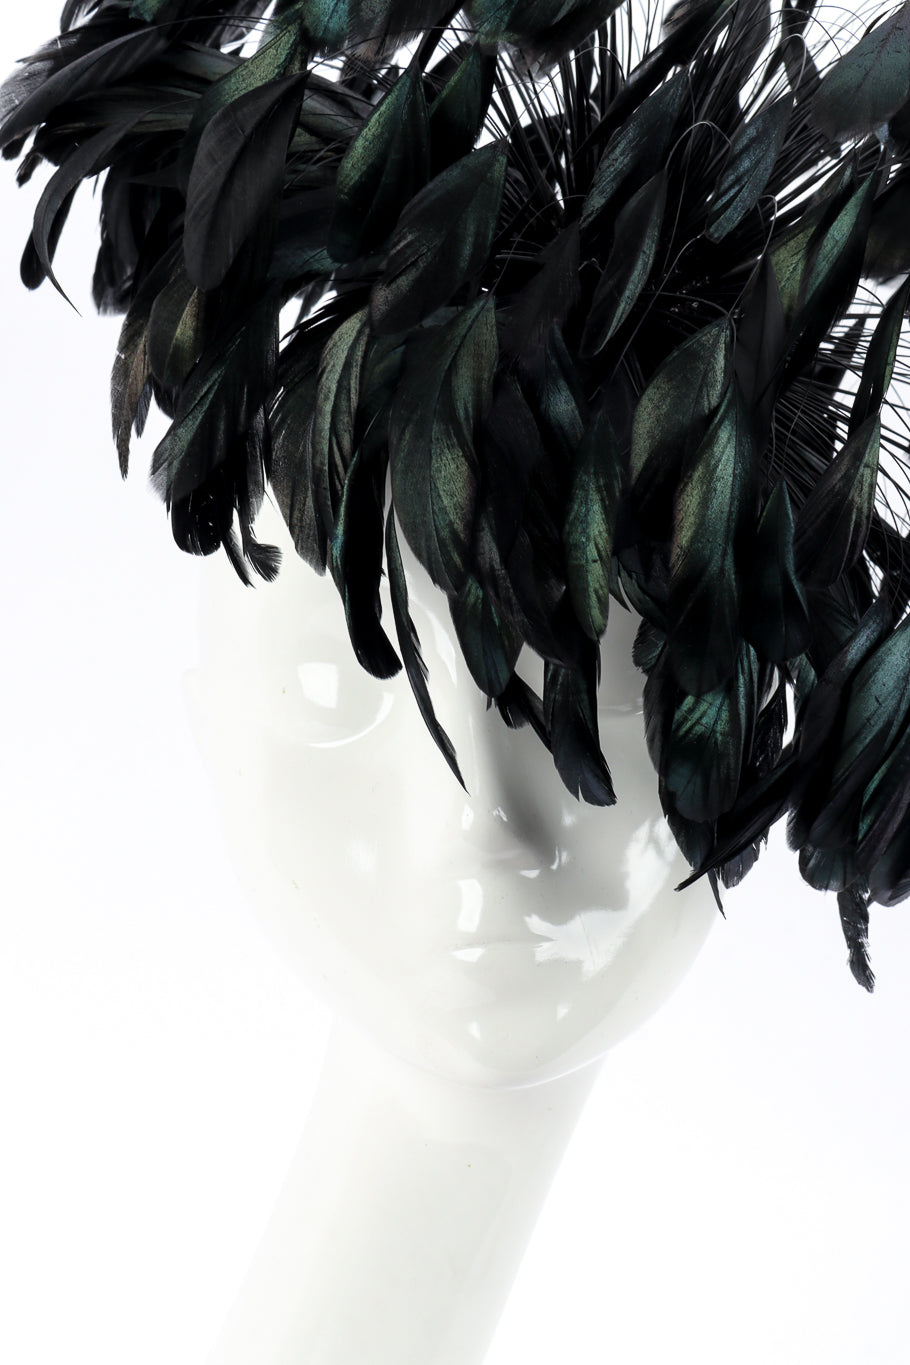 Raven Feather Fascinator Hat by Winkelman's on mannequin head face close with feathers draped over @recessla